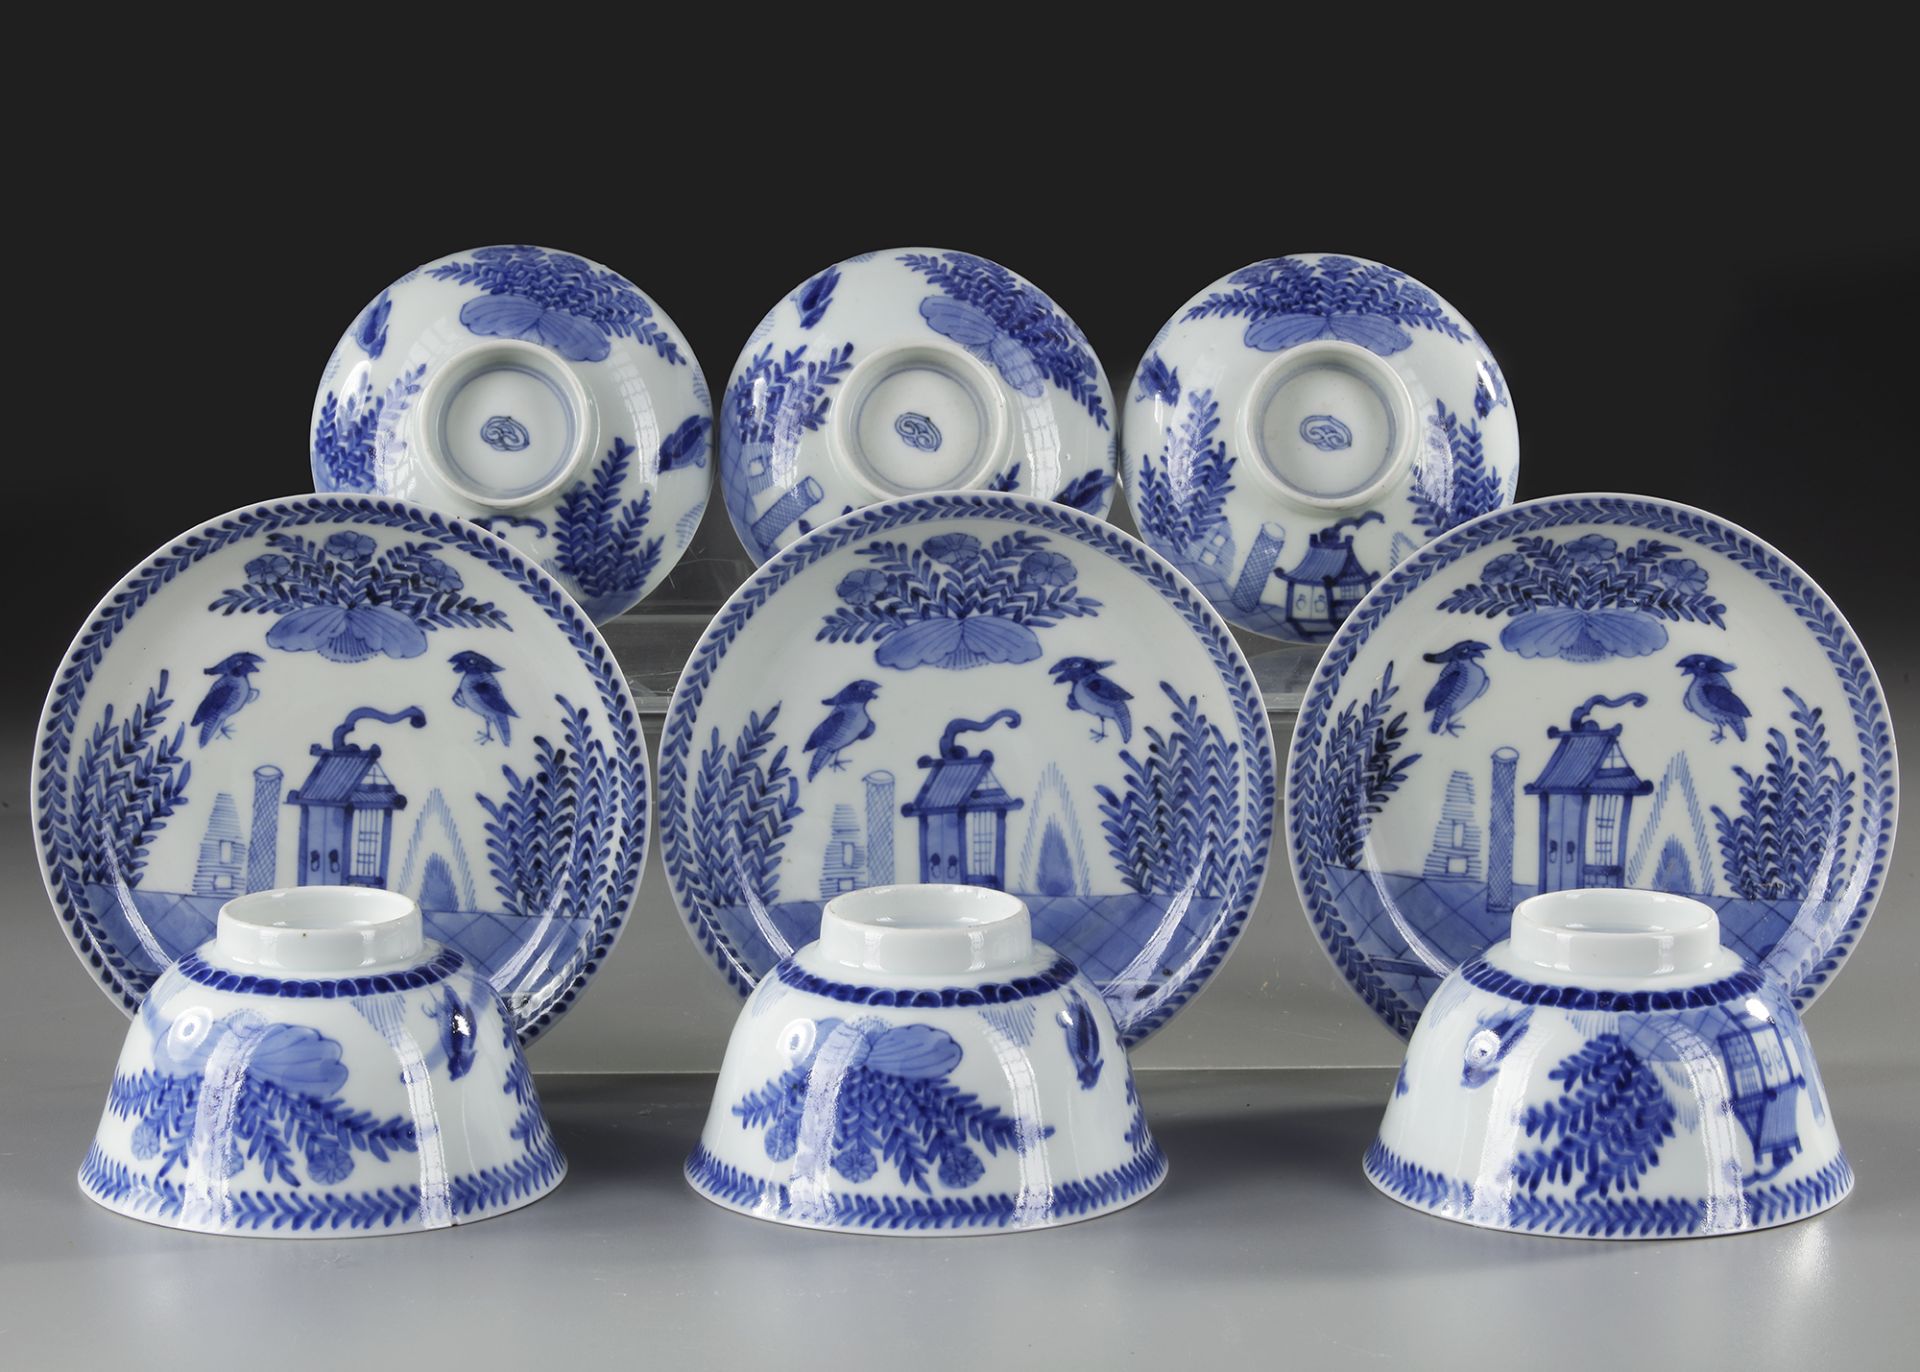 THREE CHINESE BLUE AND WHITE 'CUCKOO IN THE HOUSE' BOWL, COVERS AND SAUCERS, 18TH-19TH CENTURY - Image 3 of 4